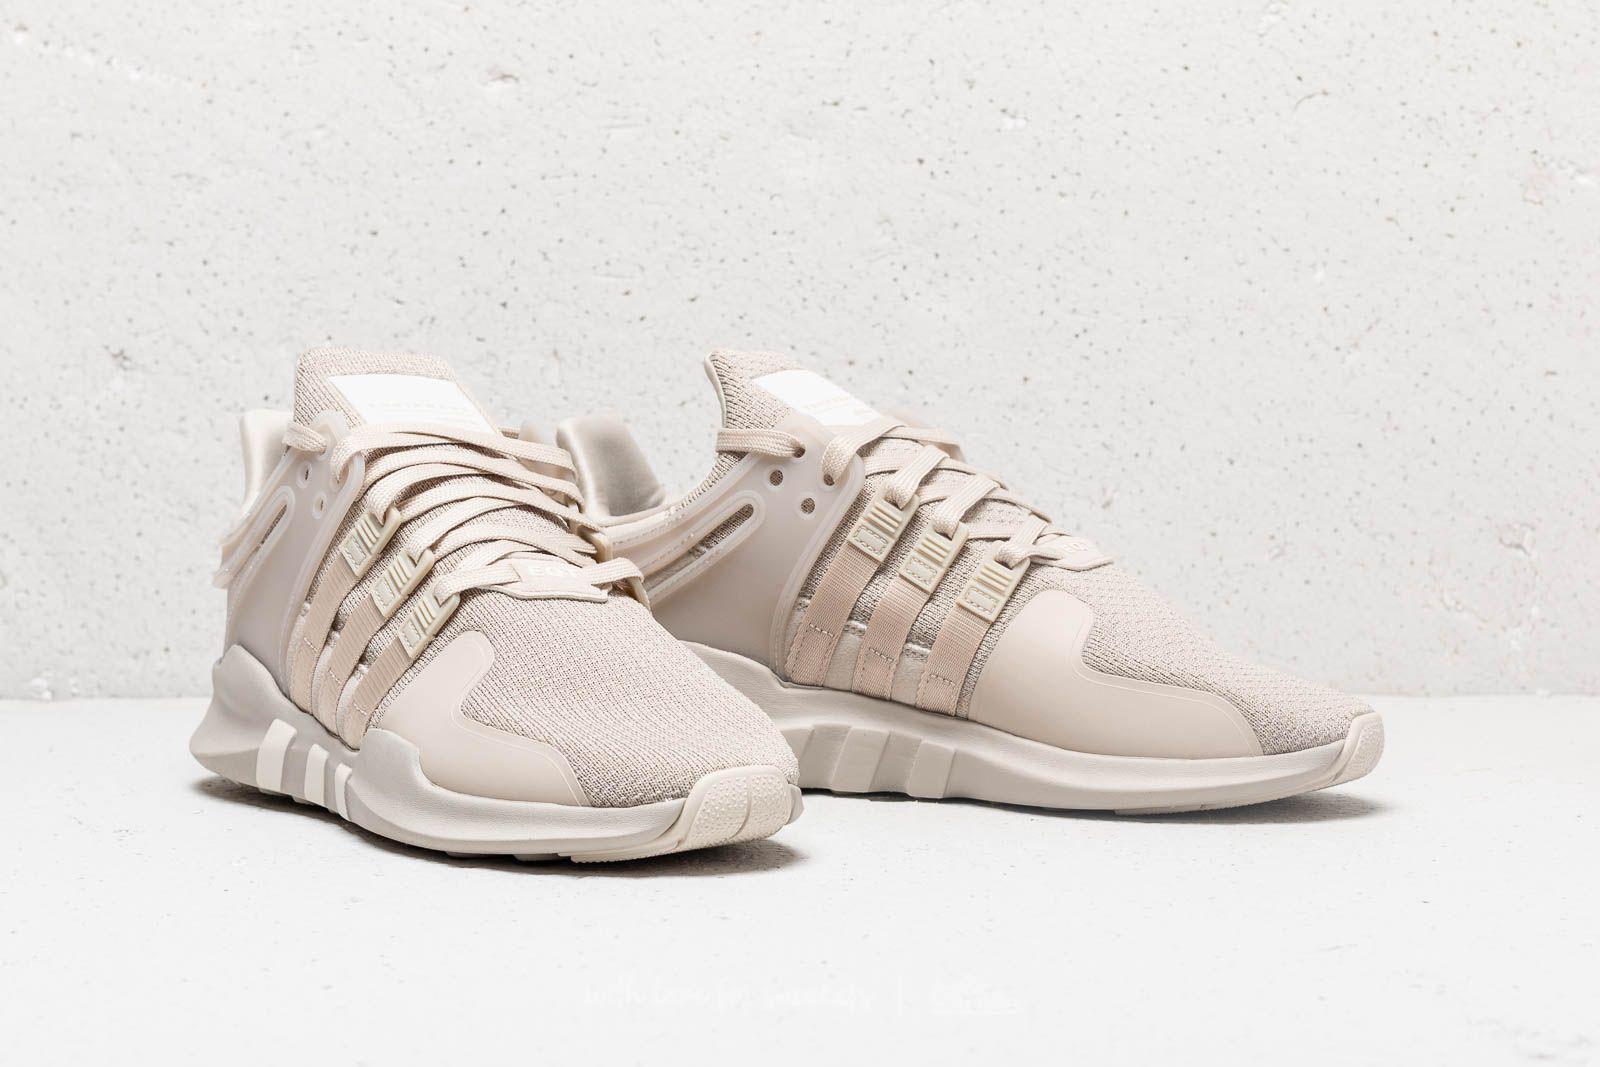 adidas eqt support adv brown